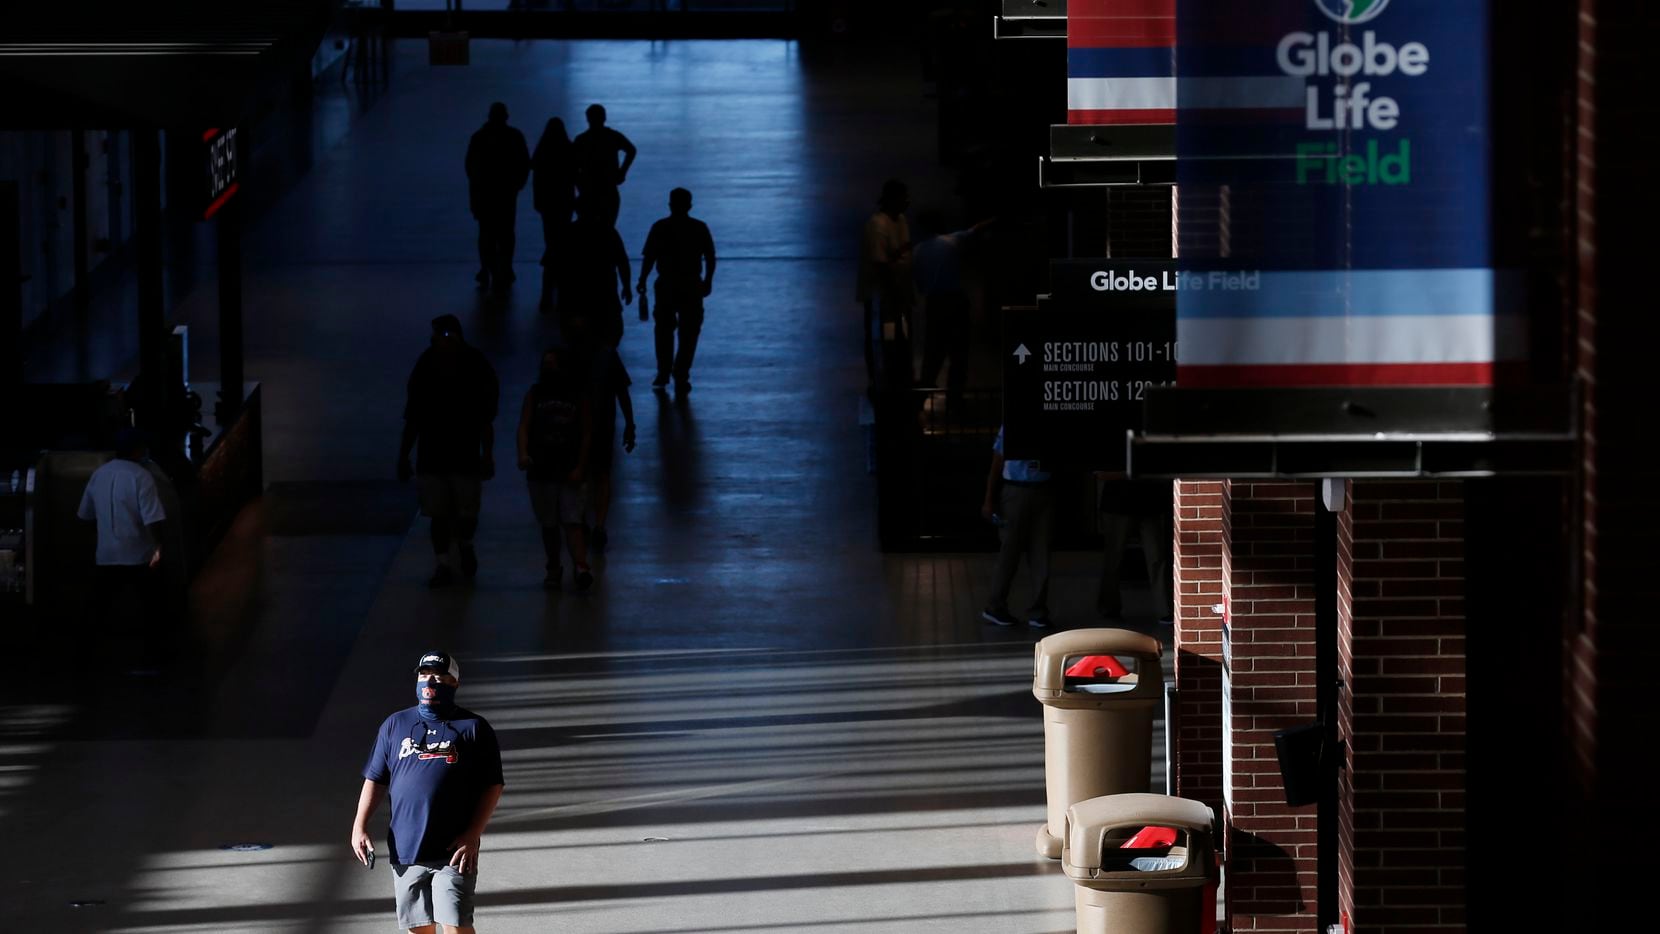 An Atlanta Braves fan walks through the concourse prior to the start of the National League Championship Series between the Atlanta Braves and the Los Angeles Dodgers  at Globe Life Field on Monday, October 12, 2020 in Arlington, Texas. This is the first time fans have been allowed into the stadium to watch a baseball game.